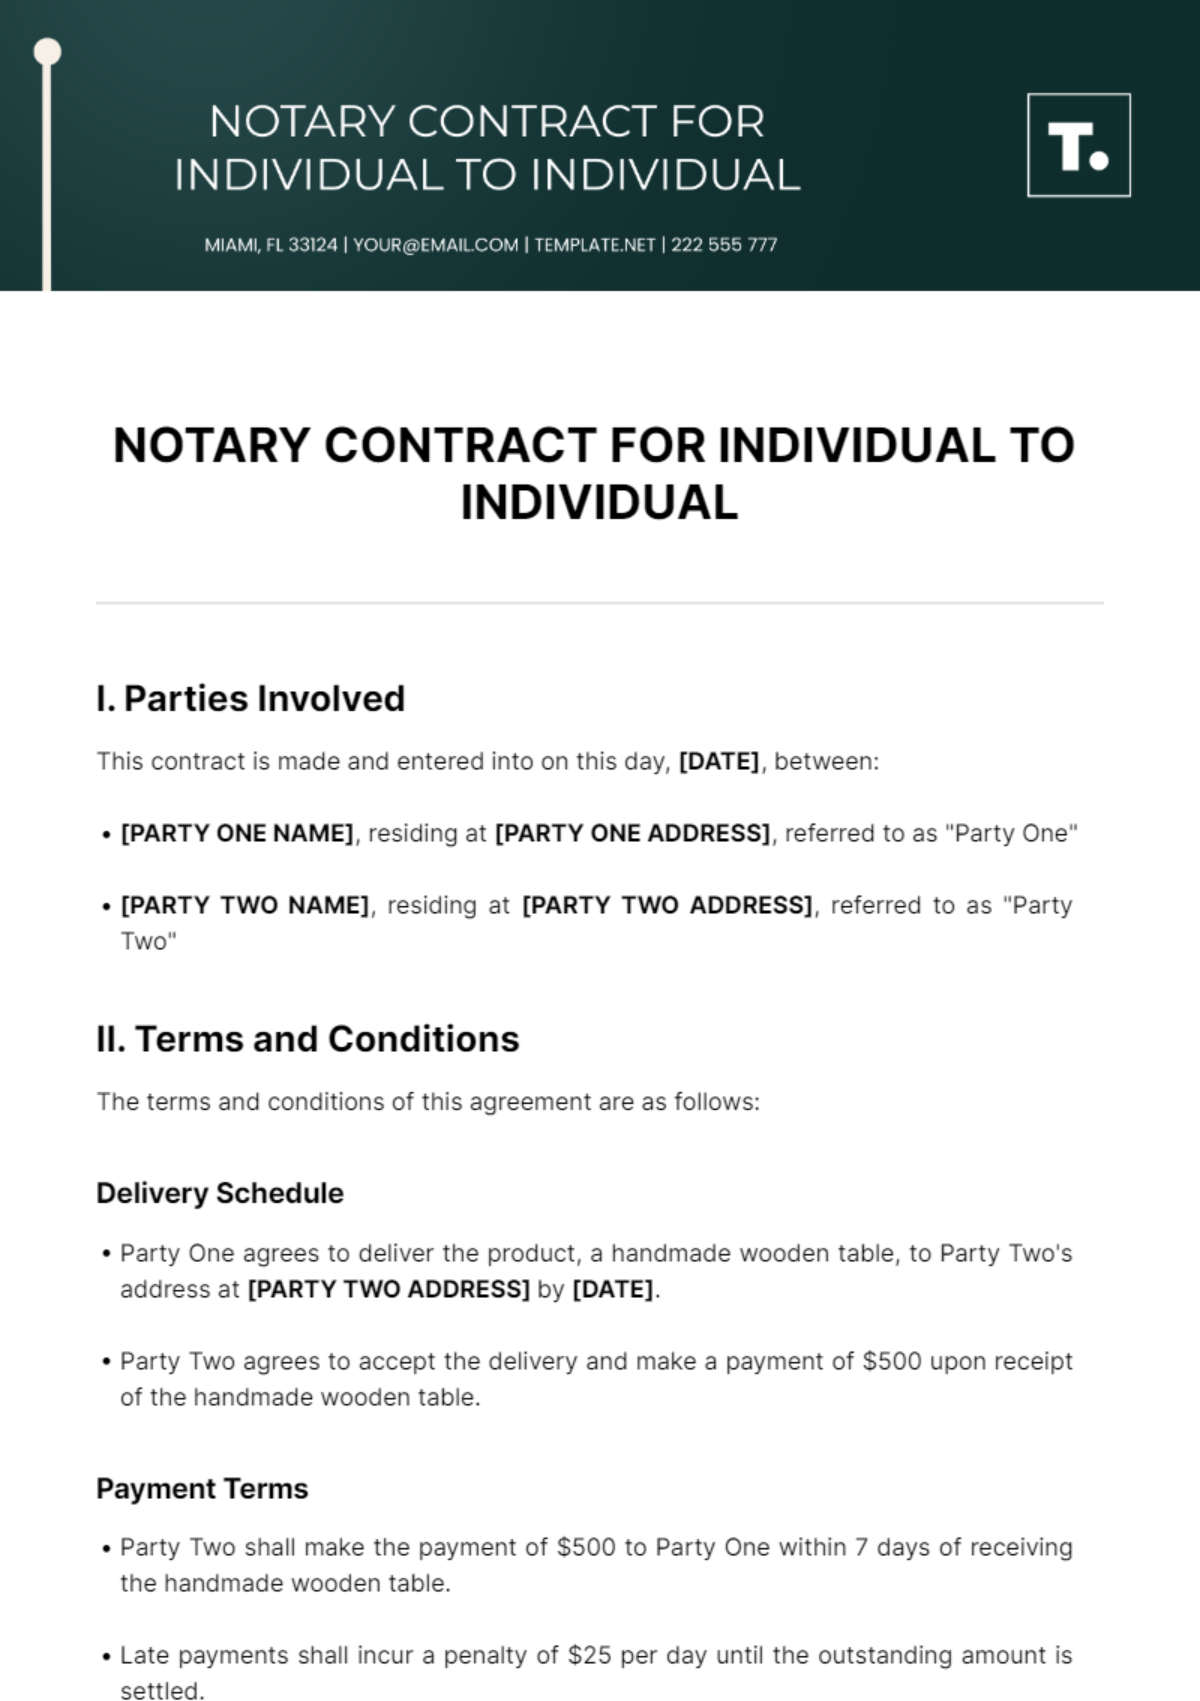 Notary Contract for Individual to Individual Template